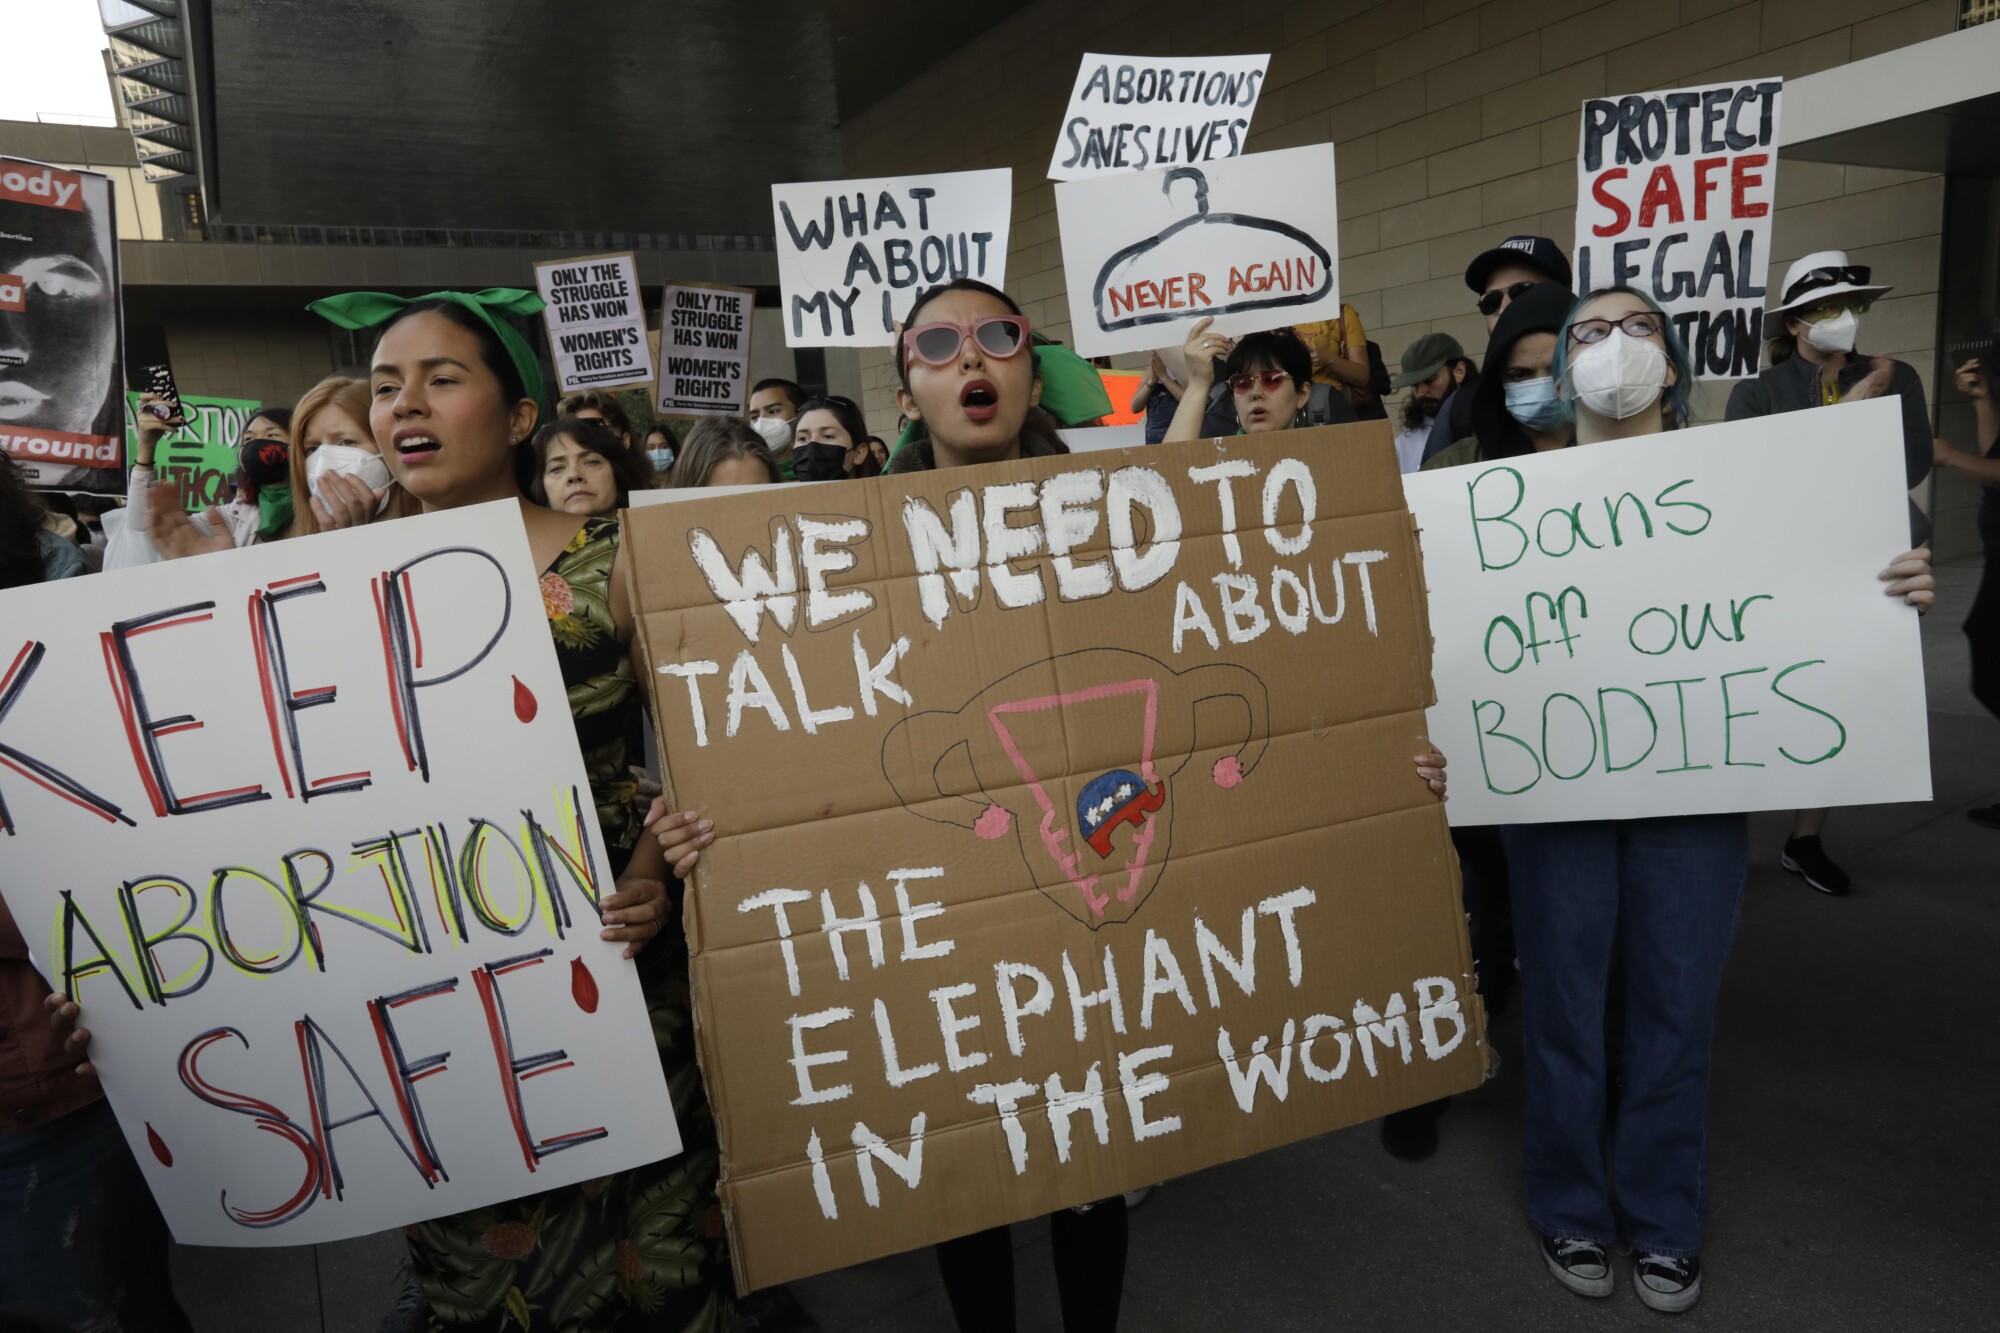 a demonstrator with a sign that says "We need to talk about the elephant in the womb"